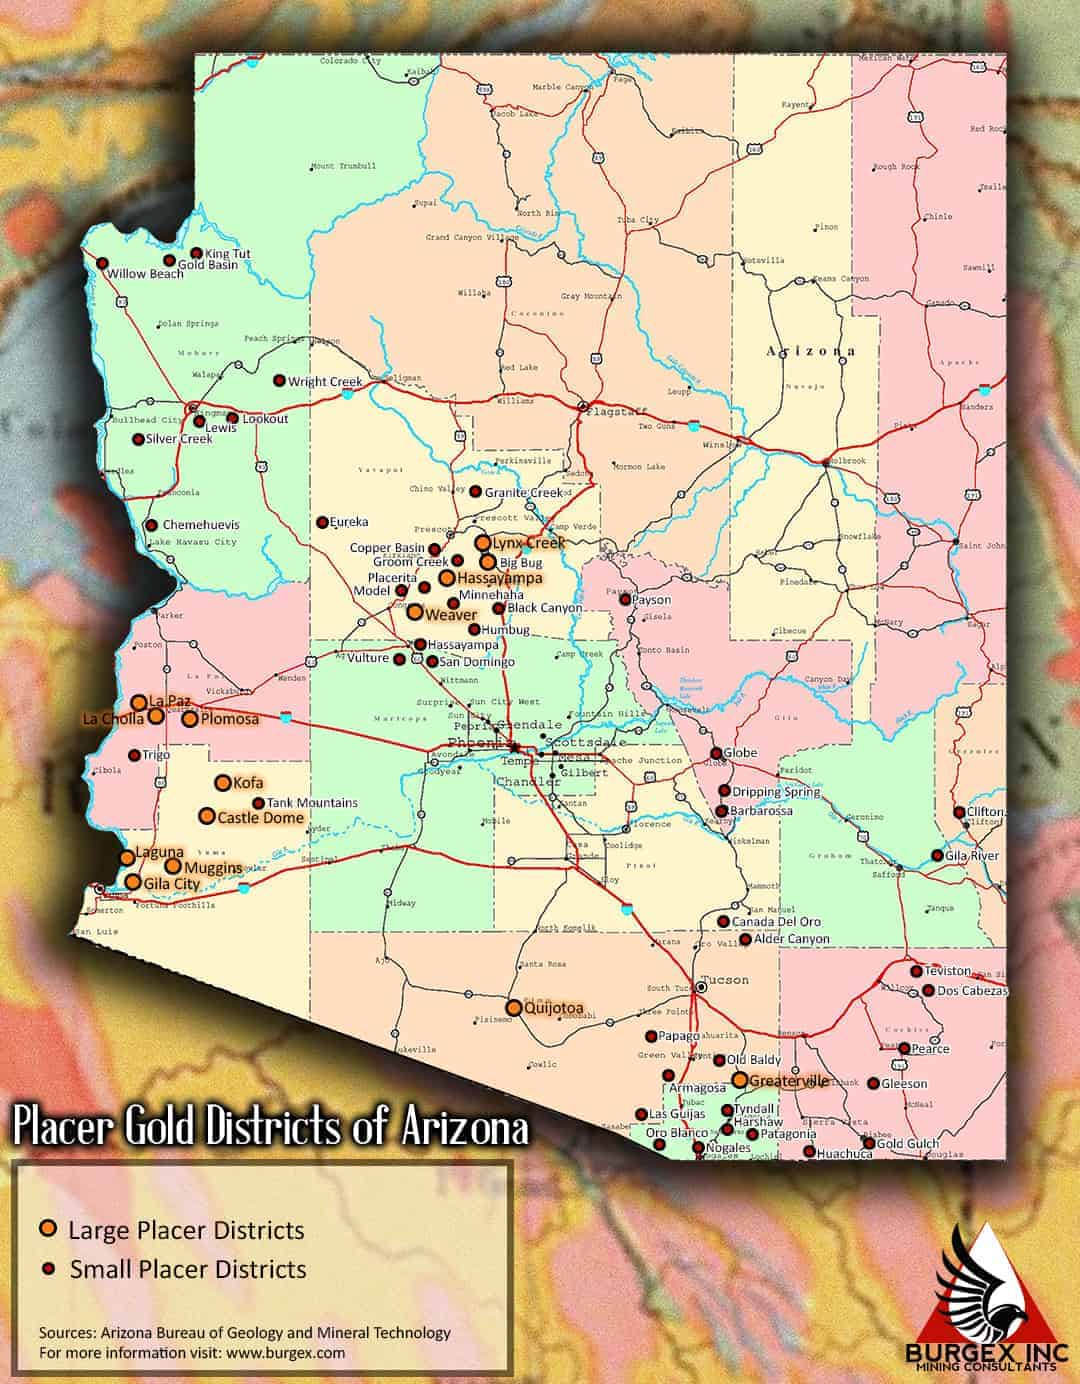 The placer gold districts of Arizona have a long history of production. 